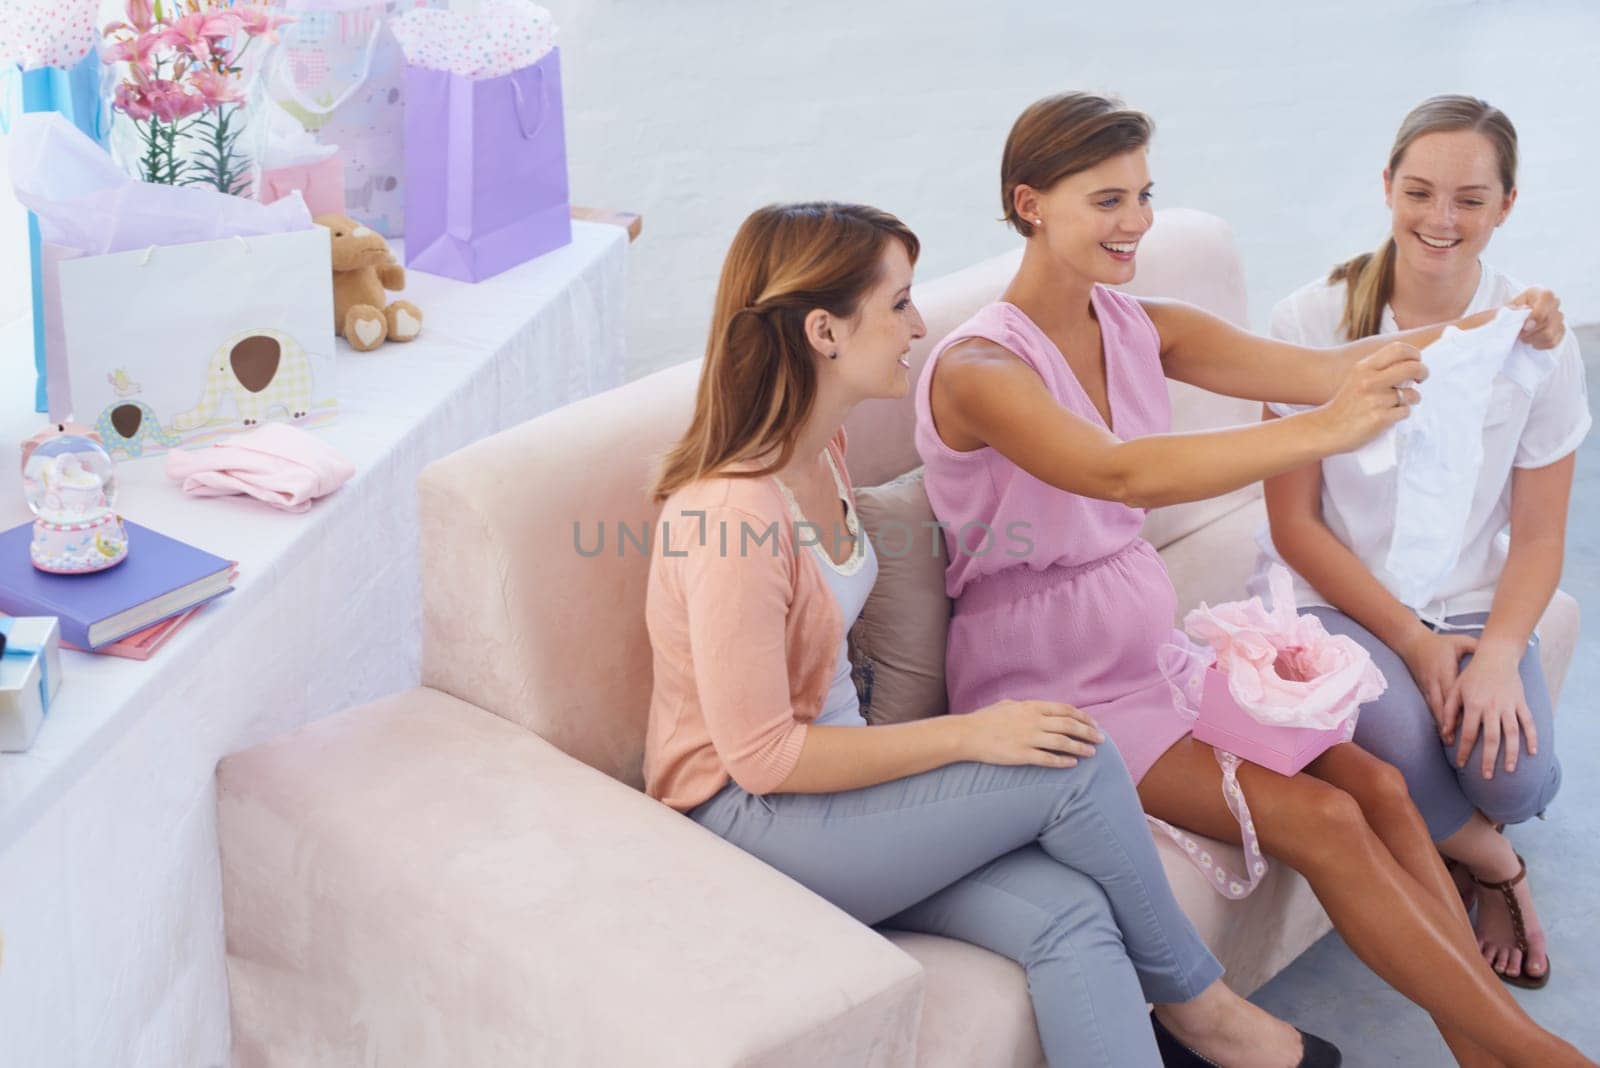 Women, baby shower and clothes in home, happy and grateful for support and present. Pregnant lady, smiling and excited for pregnancy, motherhood and celebrating child with best friends in house.